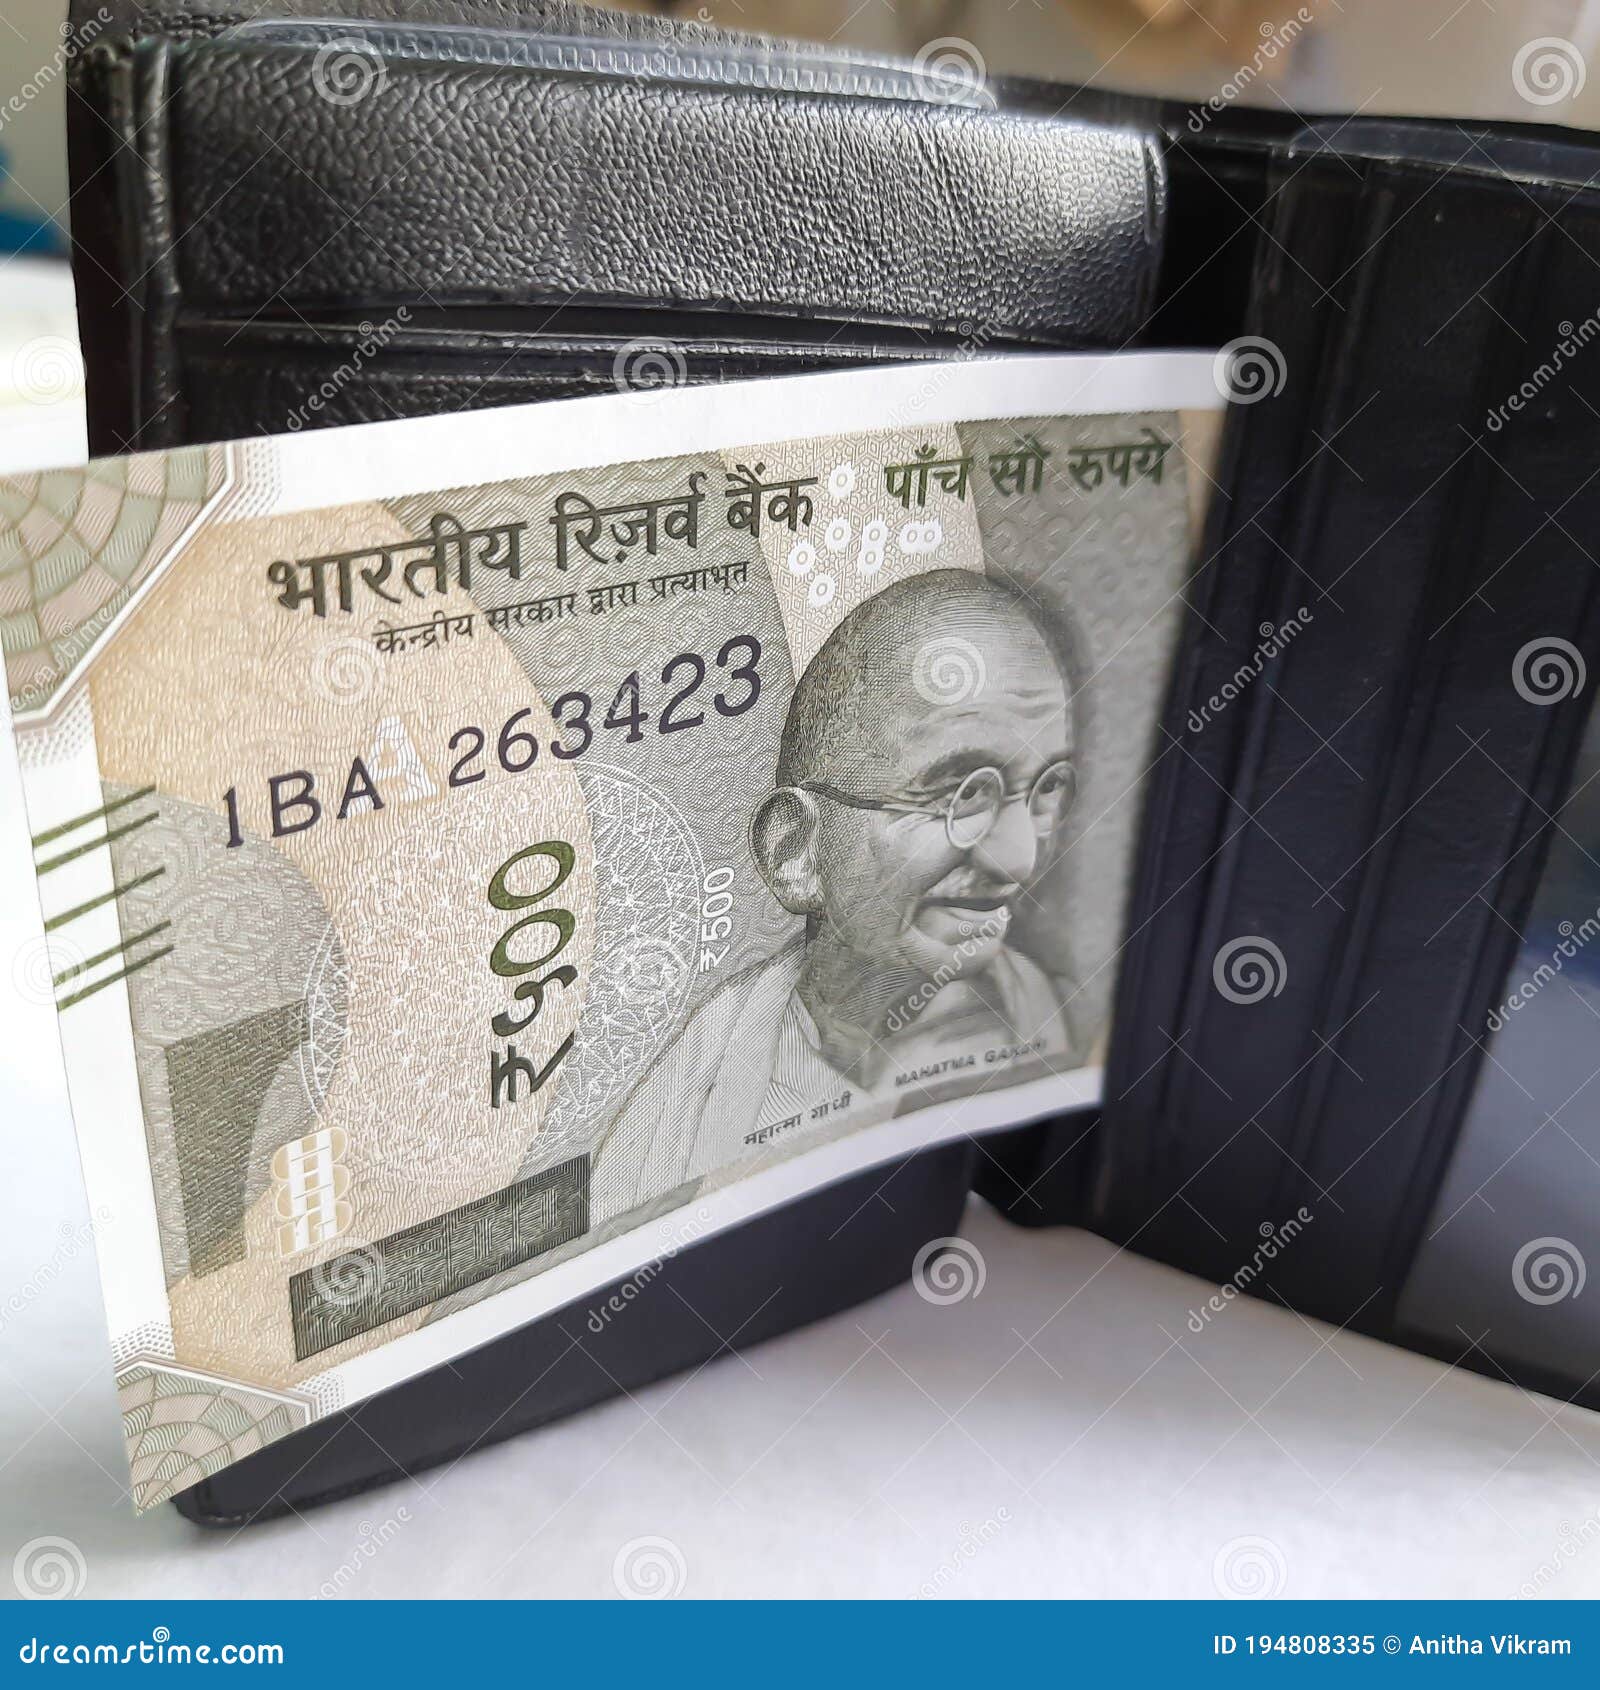 Buy Wallet King 2000 & 500 Indian Currency Notes Printed Design Canvas  Wallet Slim Purse Bi-Folded at Amazon.in